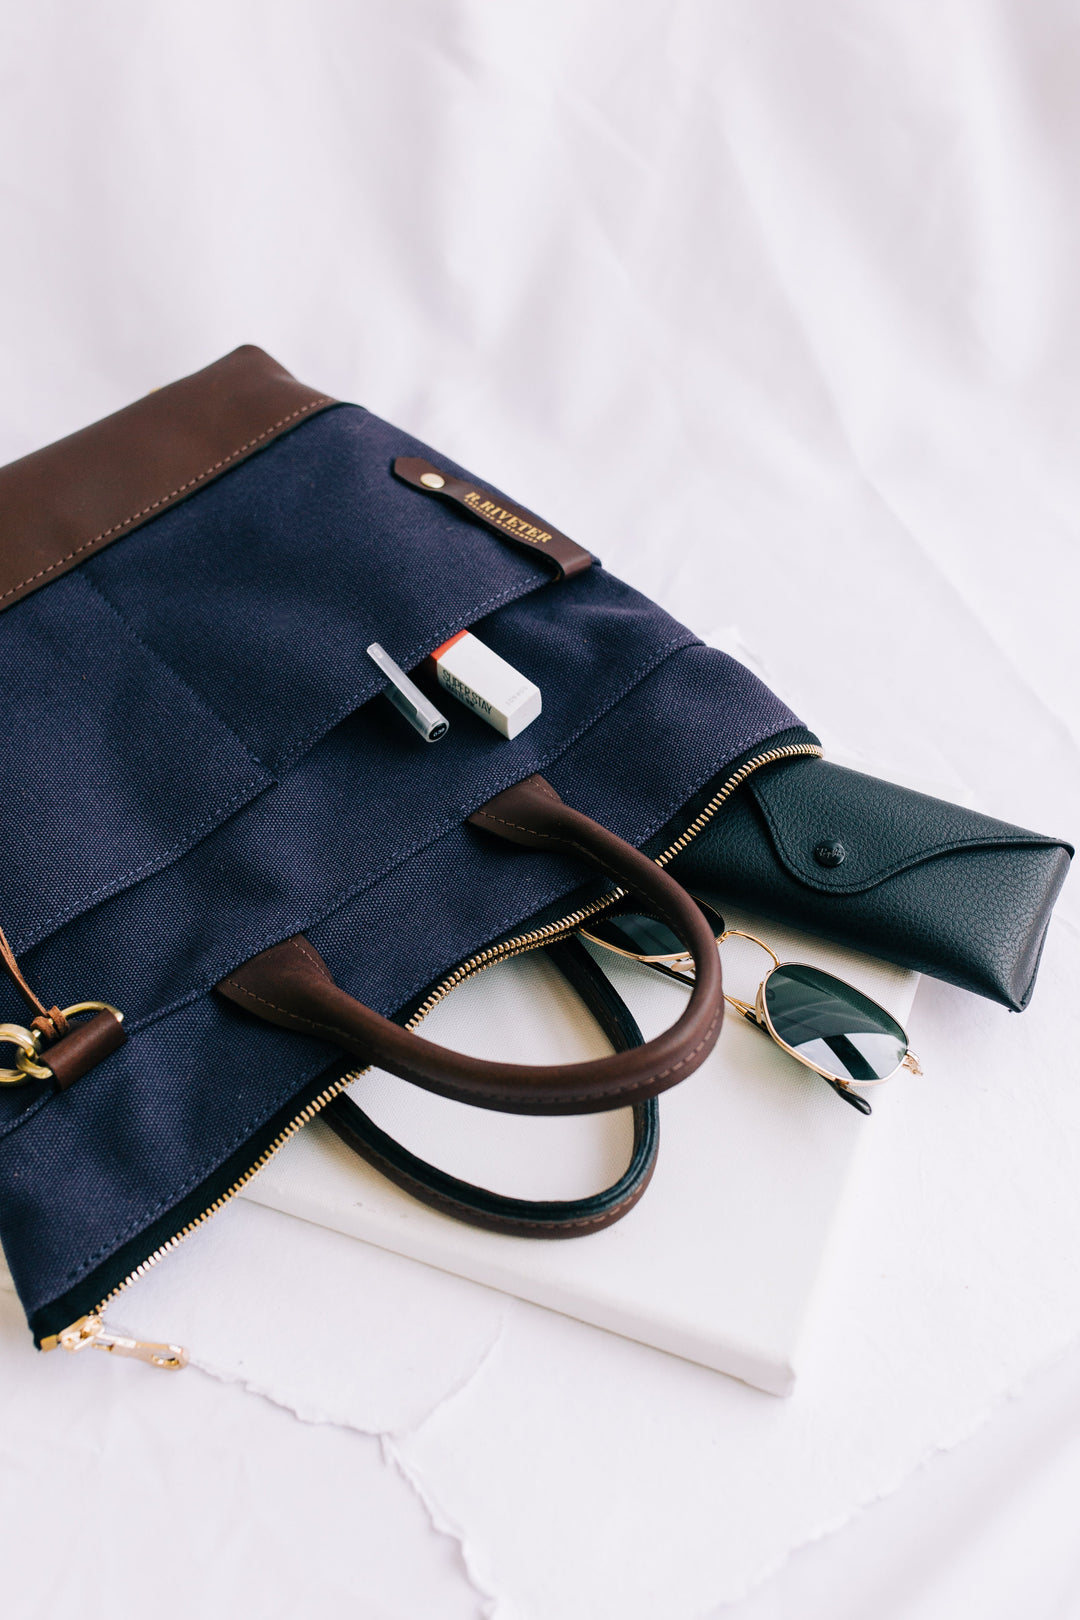 Otto | Signature Navy Canvas + Brown Leather